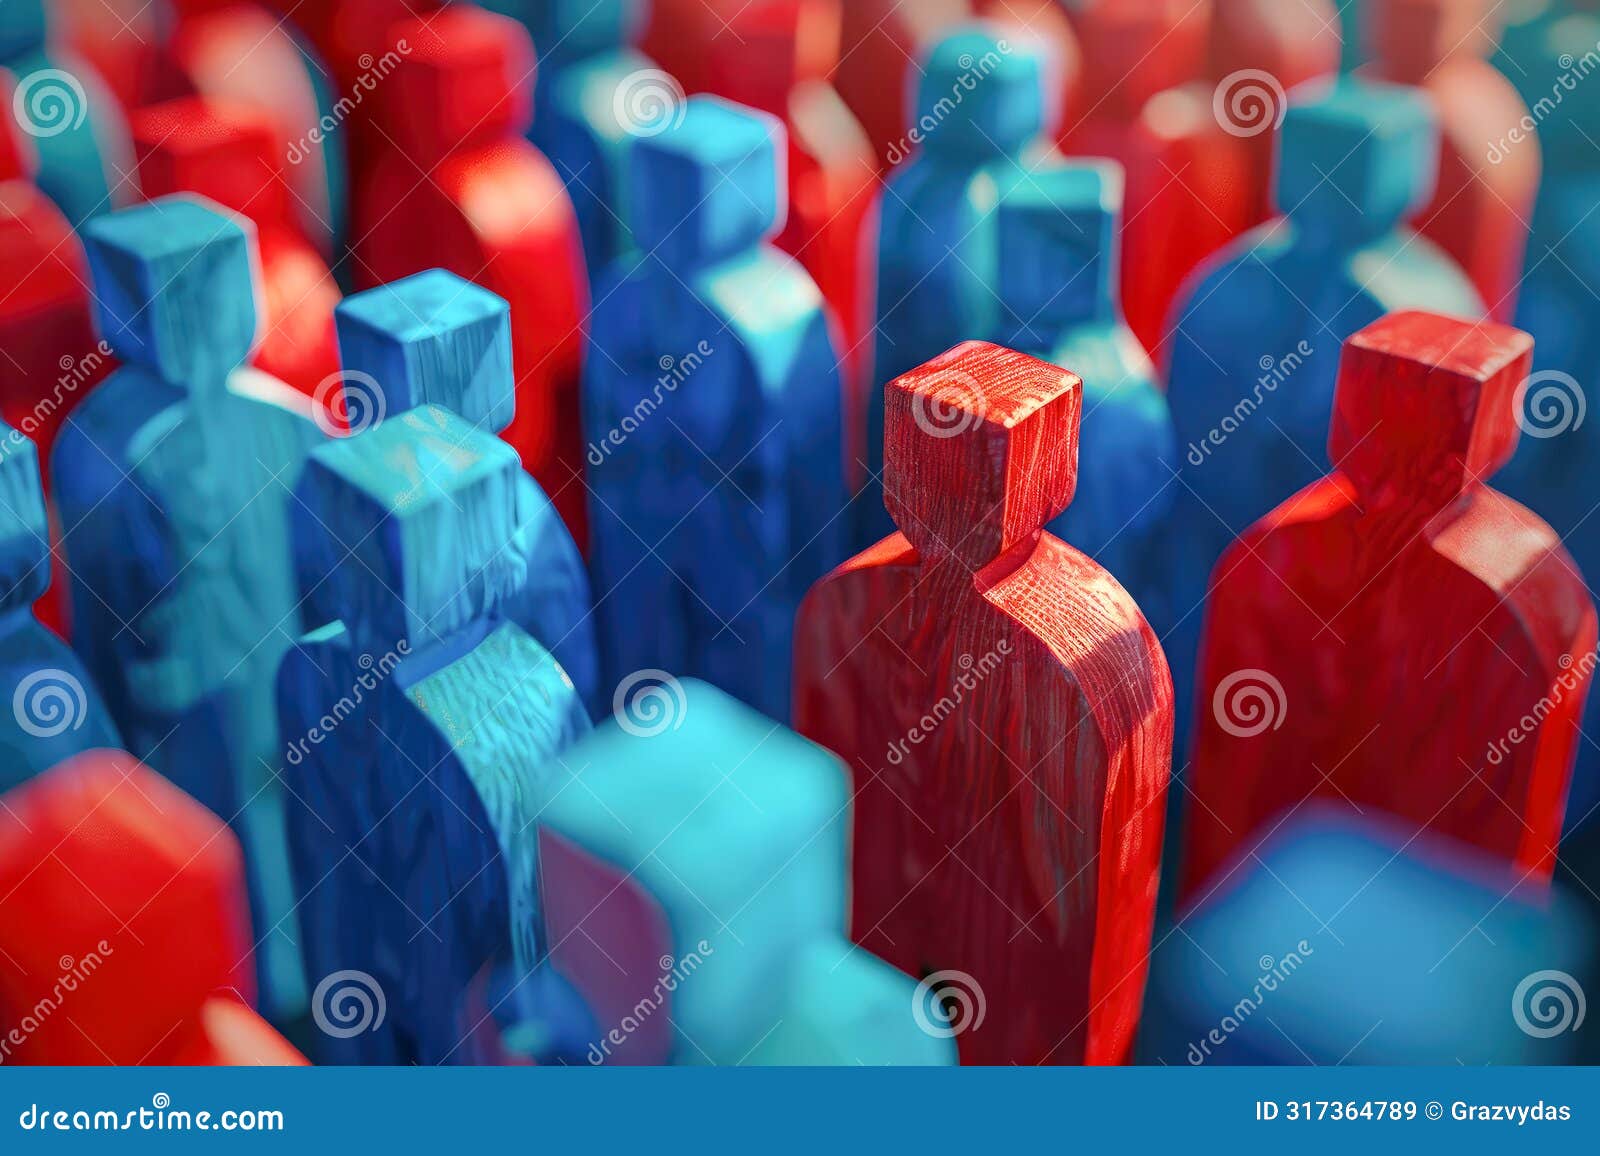 red and blue wooden figures of people.value dignity and respect for all people